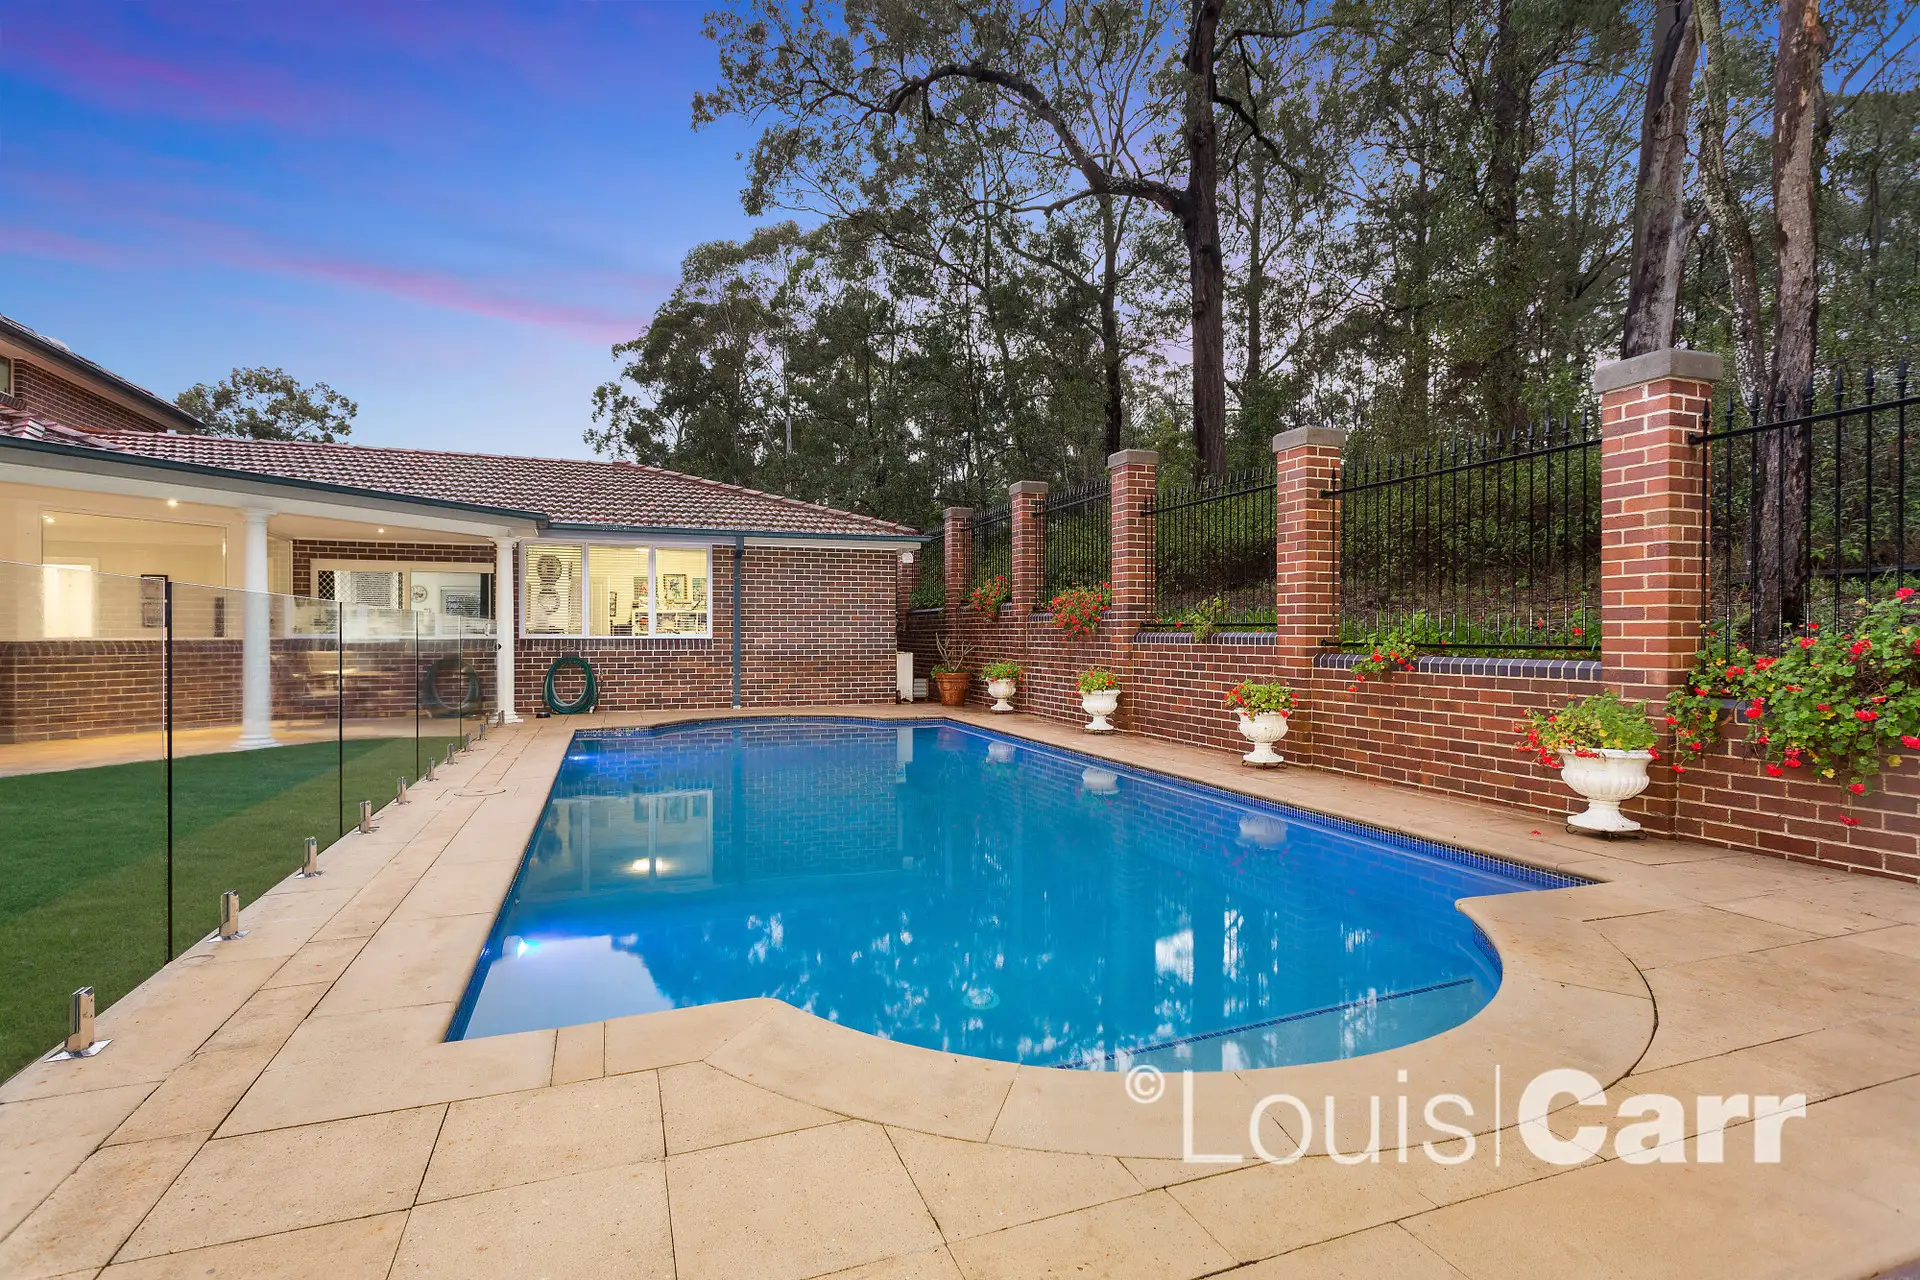 Photo #6: 3 Compton Green, West Pennant Hills - Sold by Louis Carr Real Estate